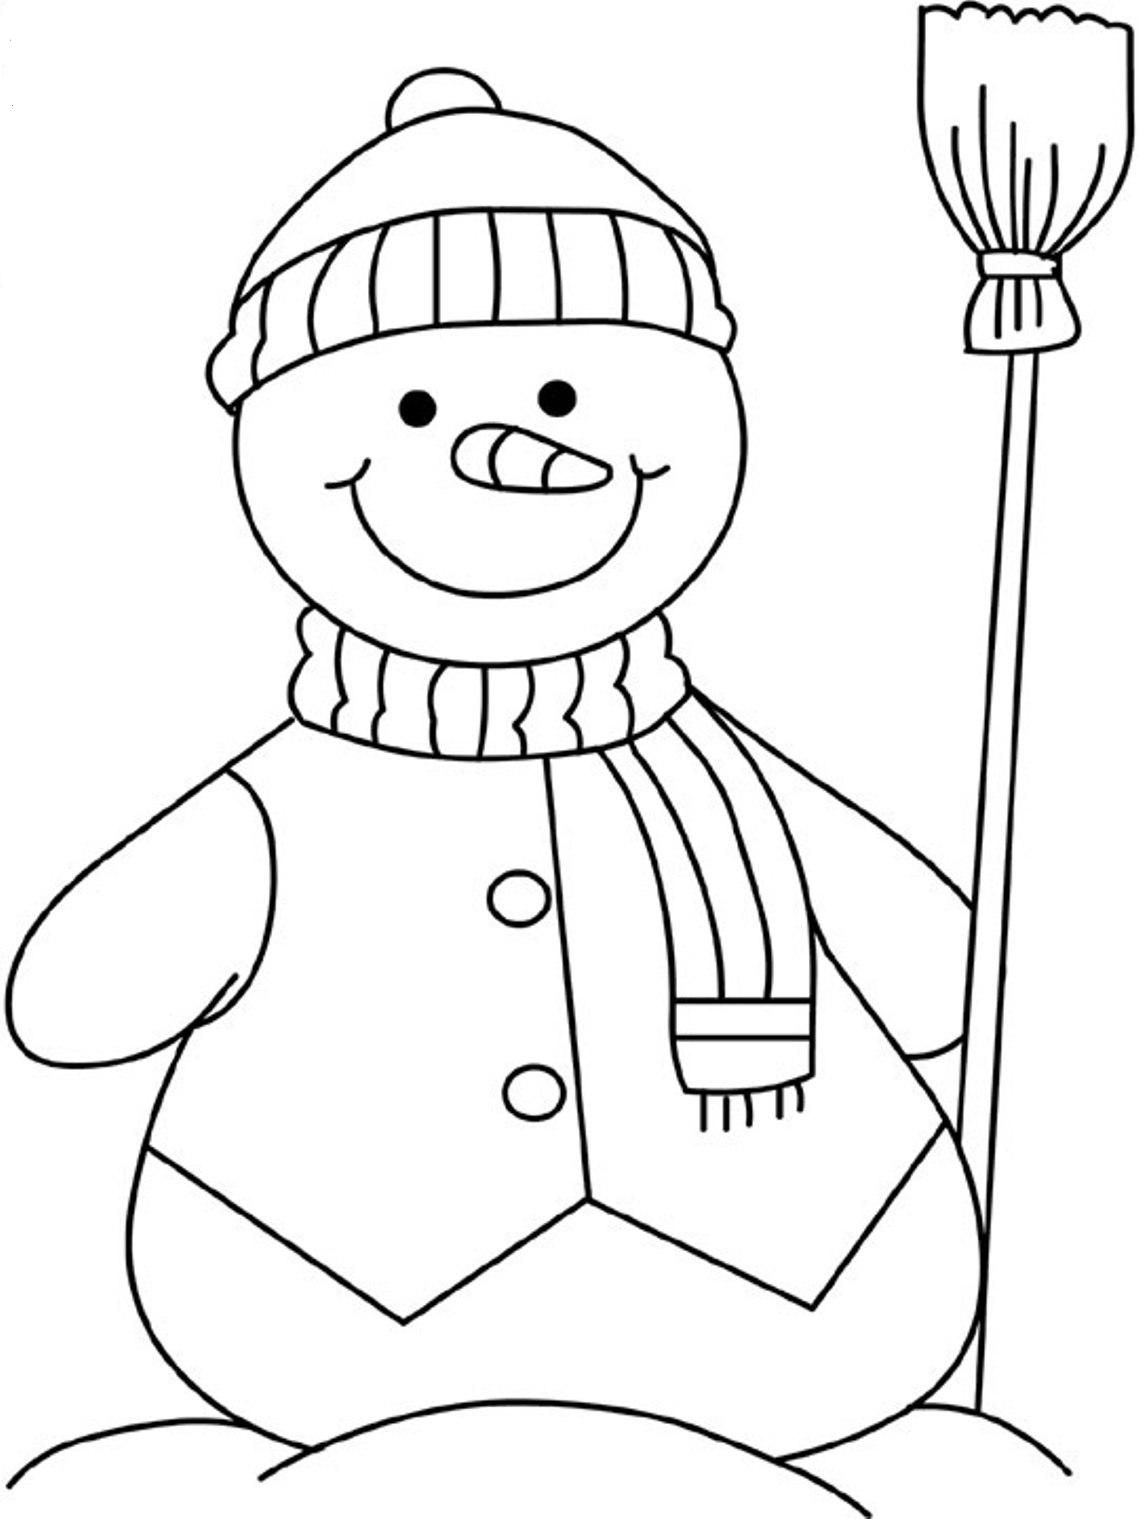 Coloring Snowman With Copics Coloring Snowman Frosty The Snowman ...